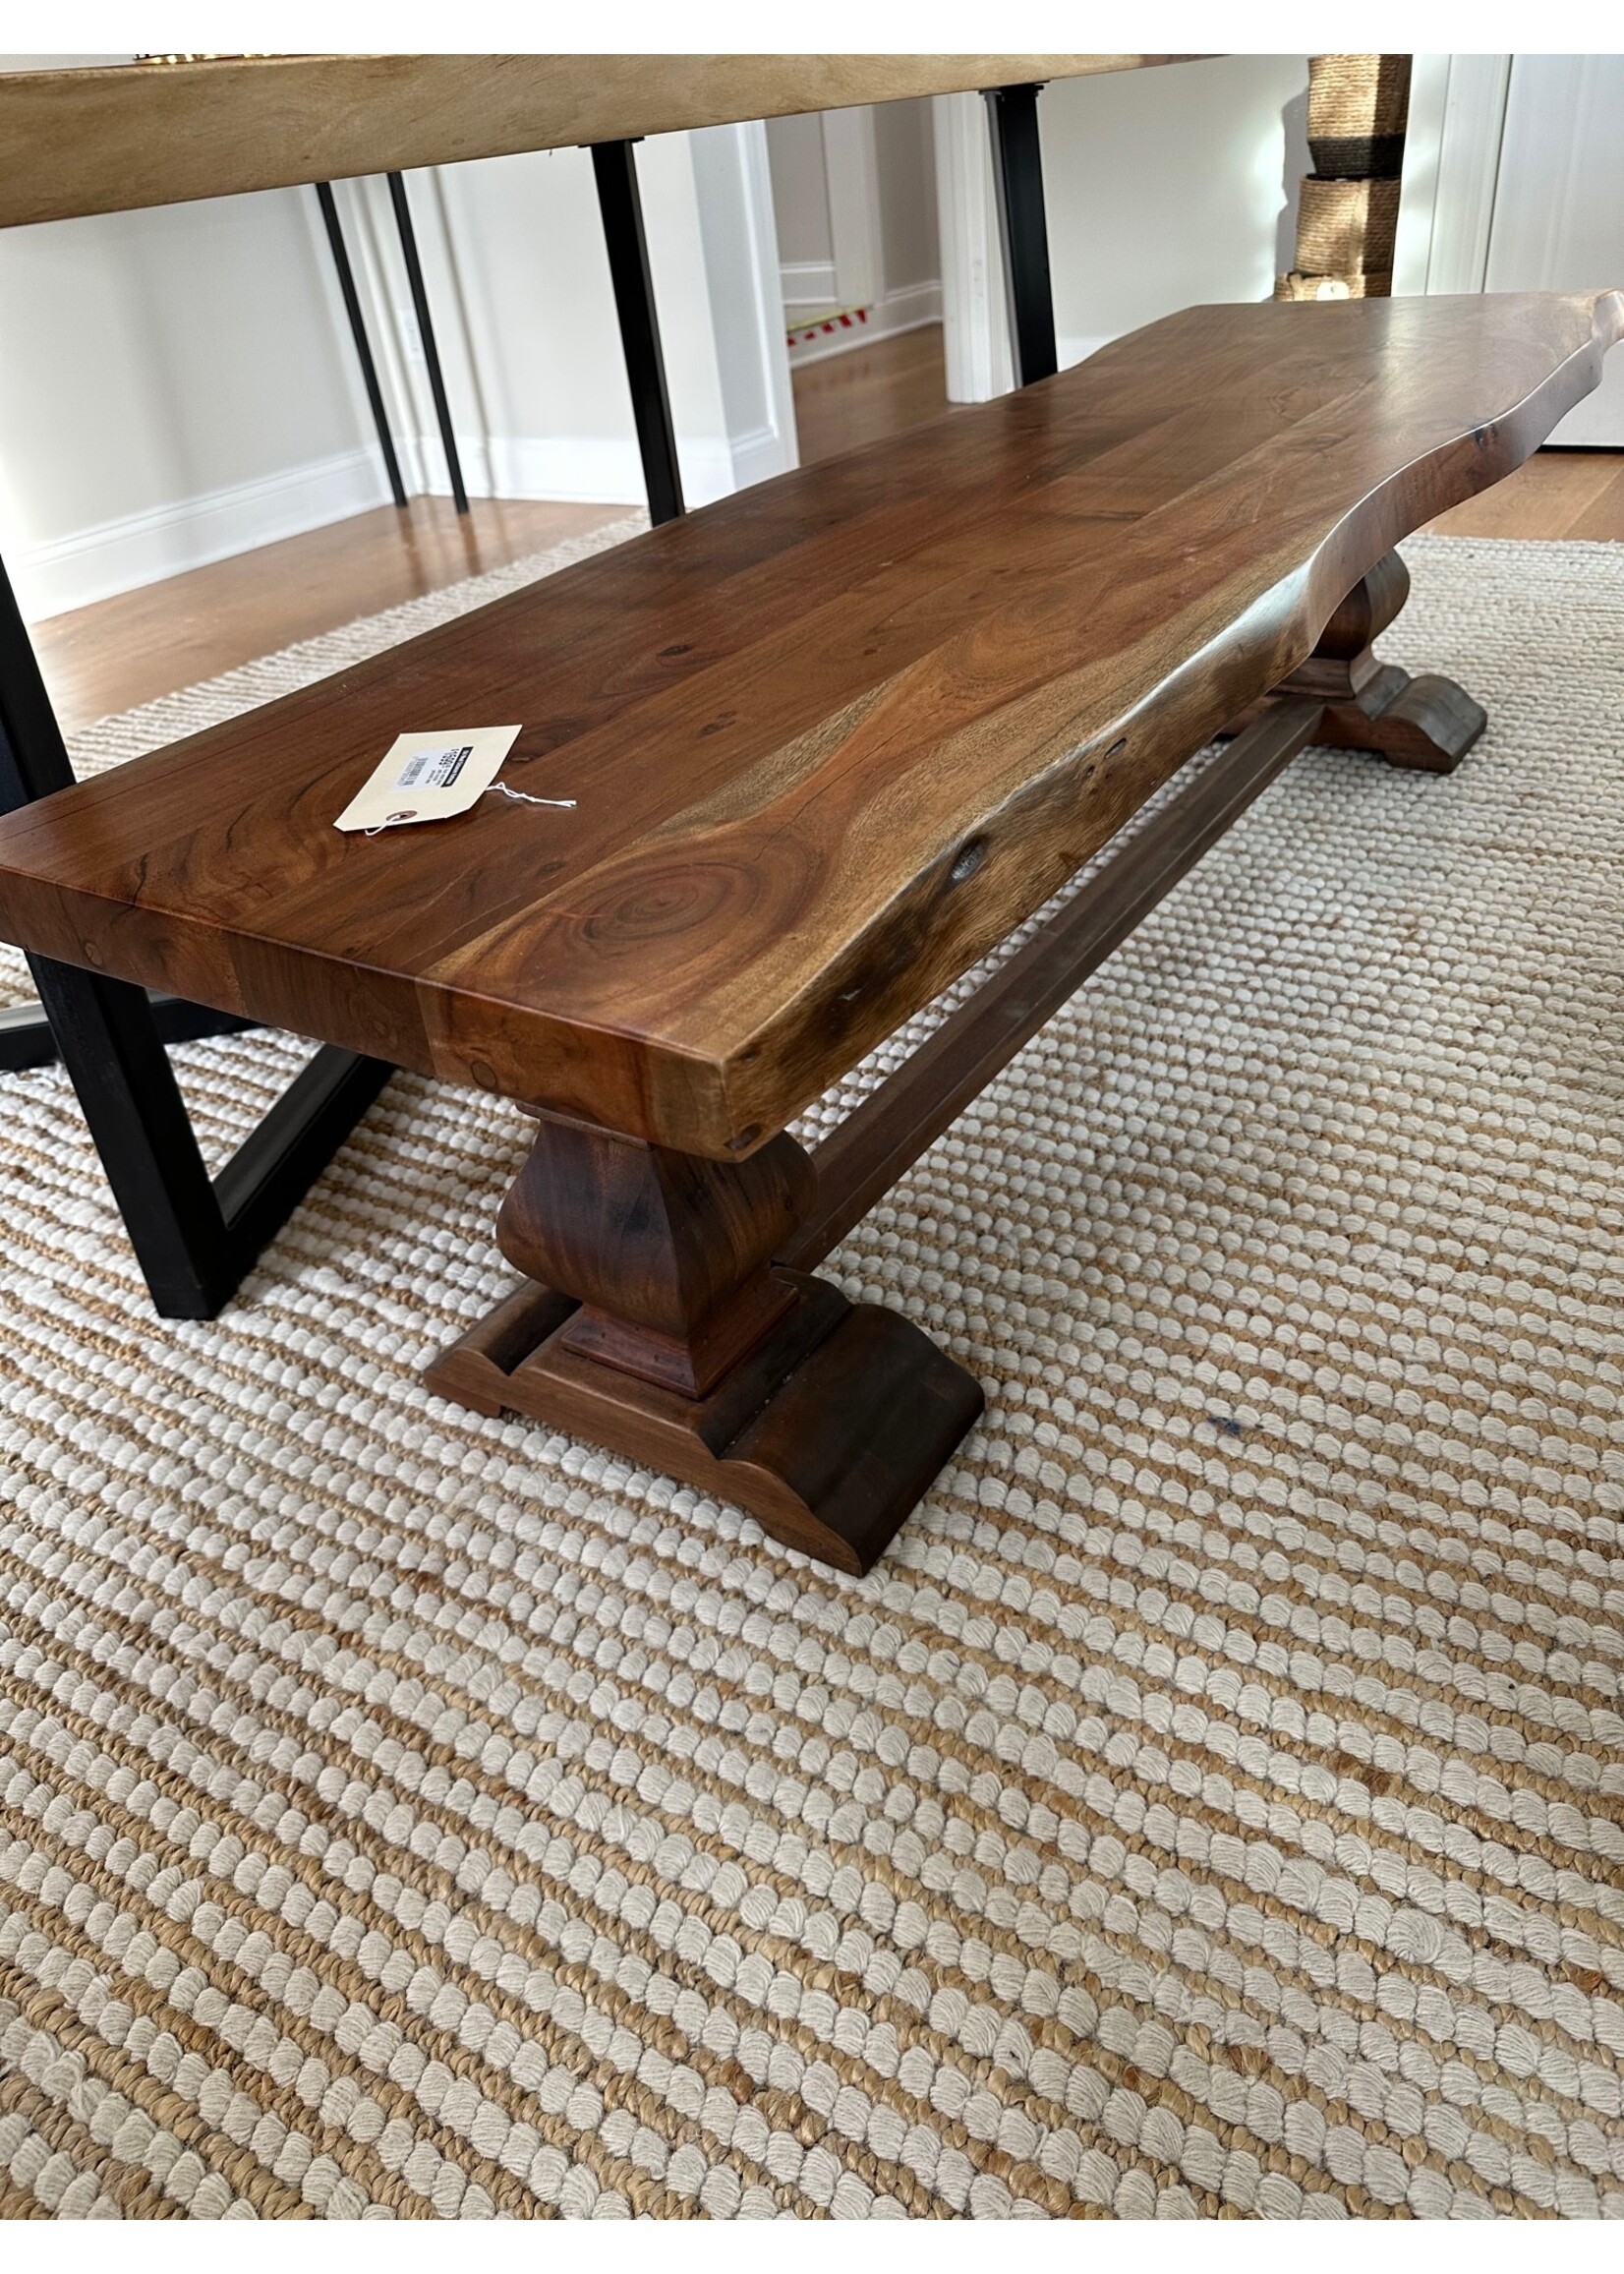 AFD/Bramble/OW Suar wood bench with double pedestal base